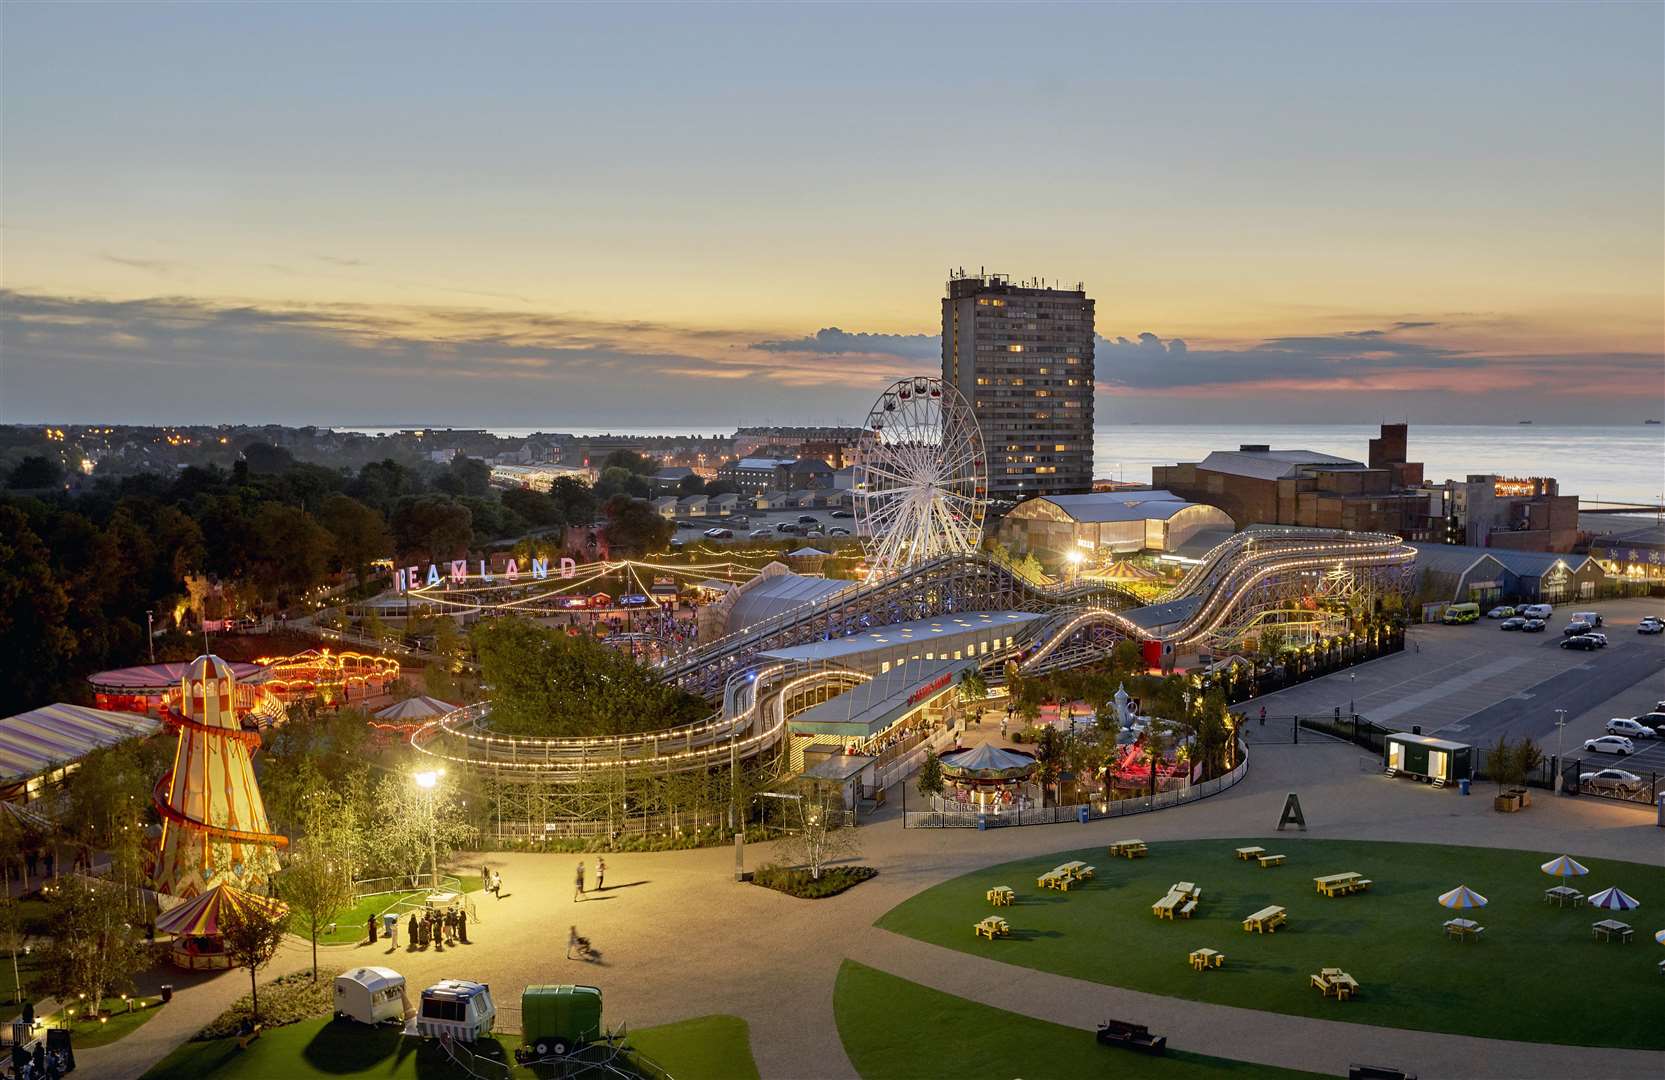 Dreamland entry prices dropped for Margate amusement park ...
